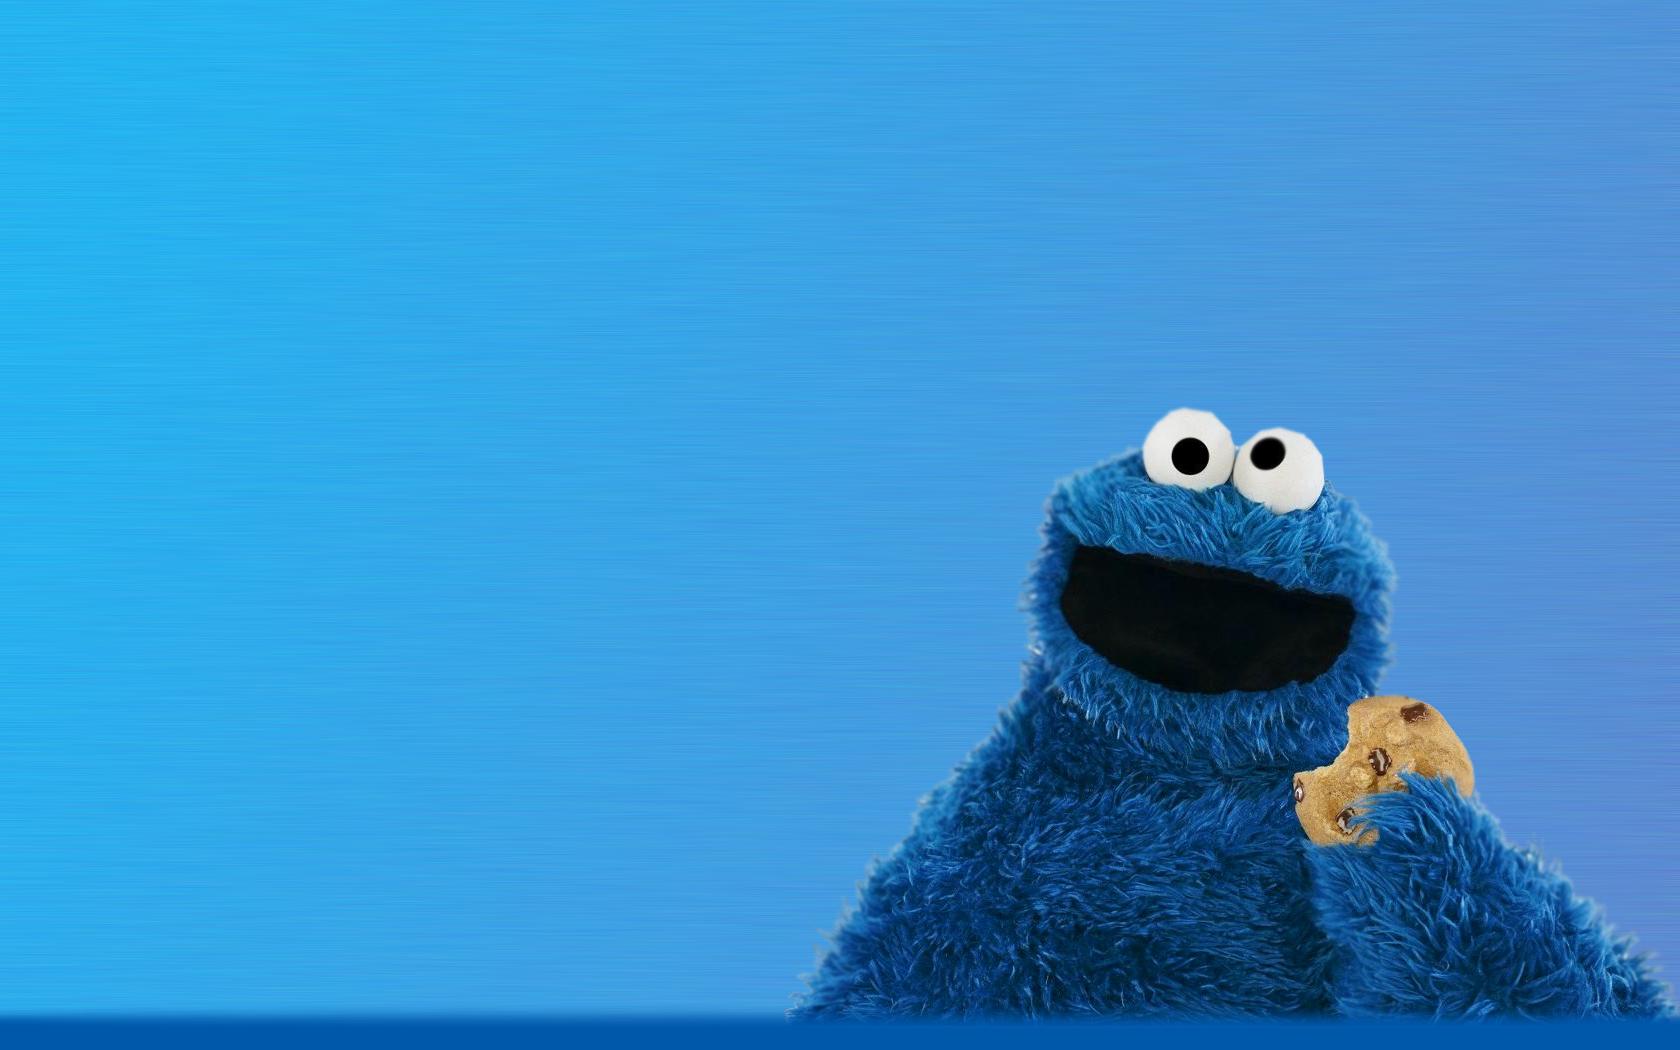 Gallery For Gt Cookie Monster Wallpaper